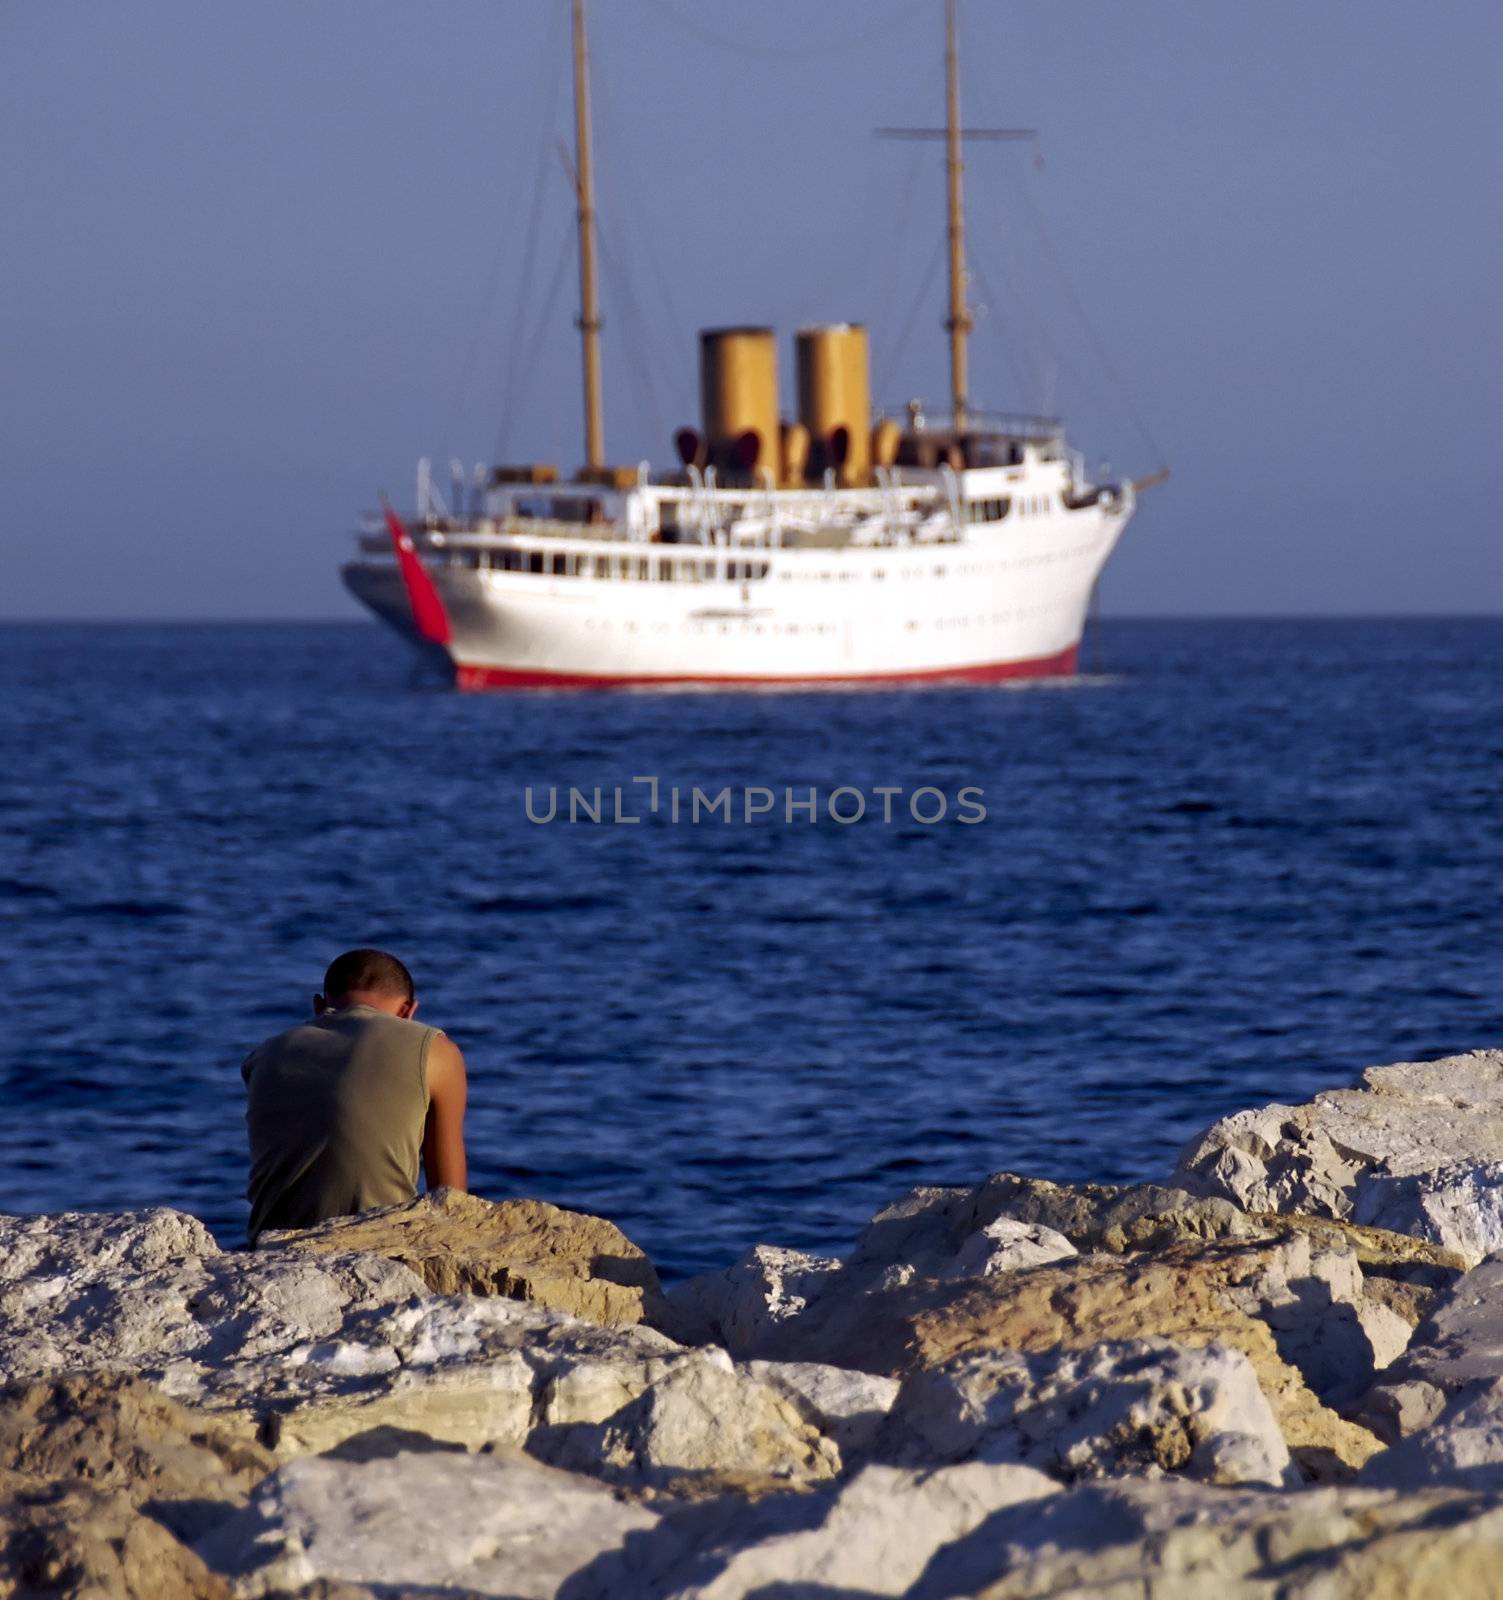 A lonely boy looks out at a departing ship